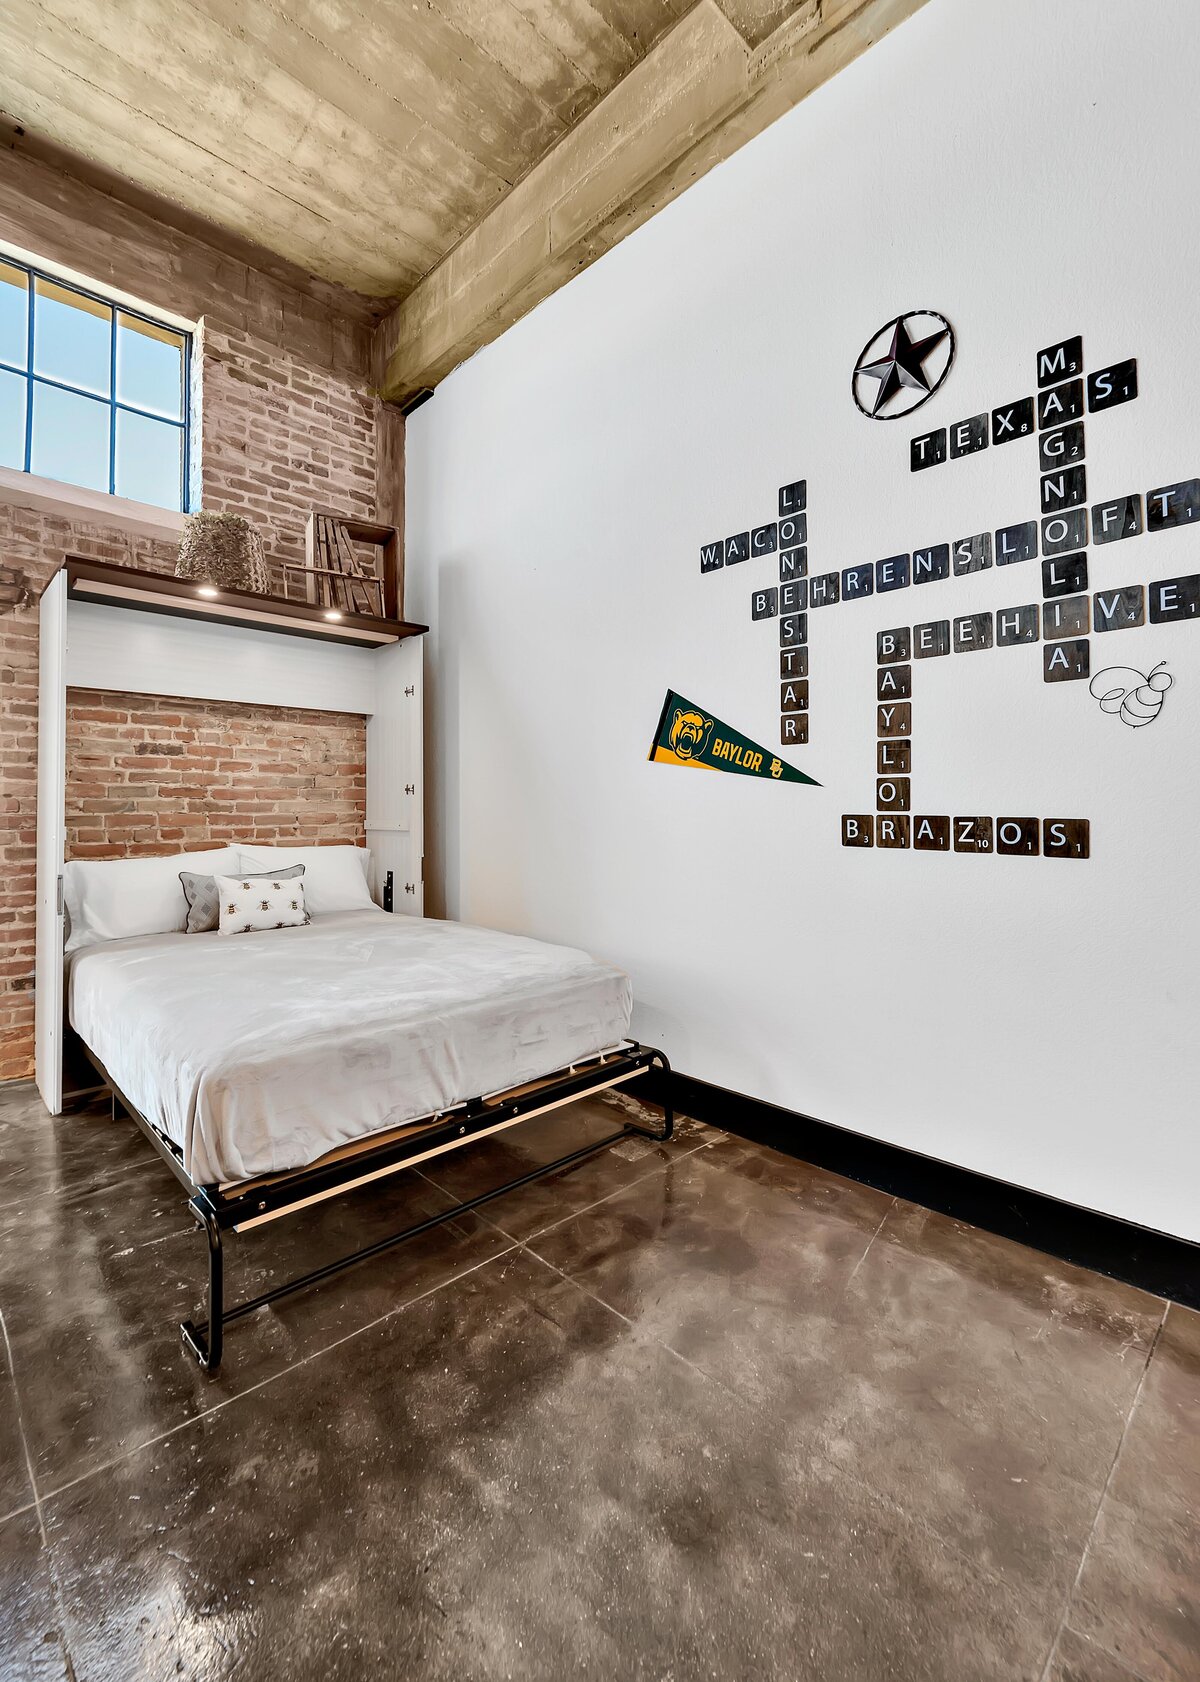 Hidden Murphy bed for two in this one-bedroom, one-bathroom vintage condo that sleeps 4 in the historic Behrens building in the heart of the Magnolia Silo District in downtown Waco, TX.